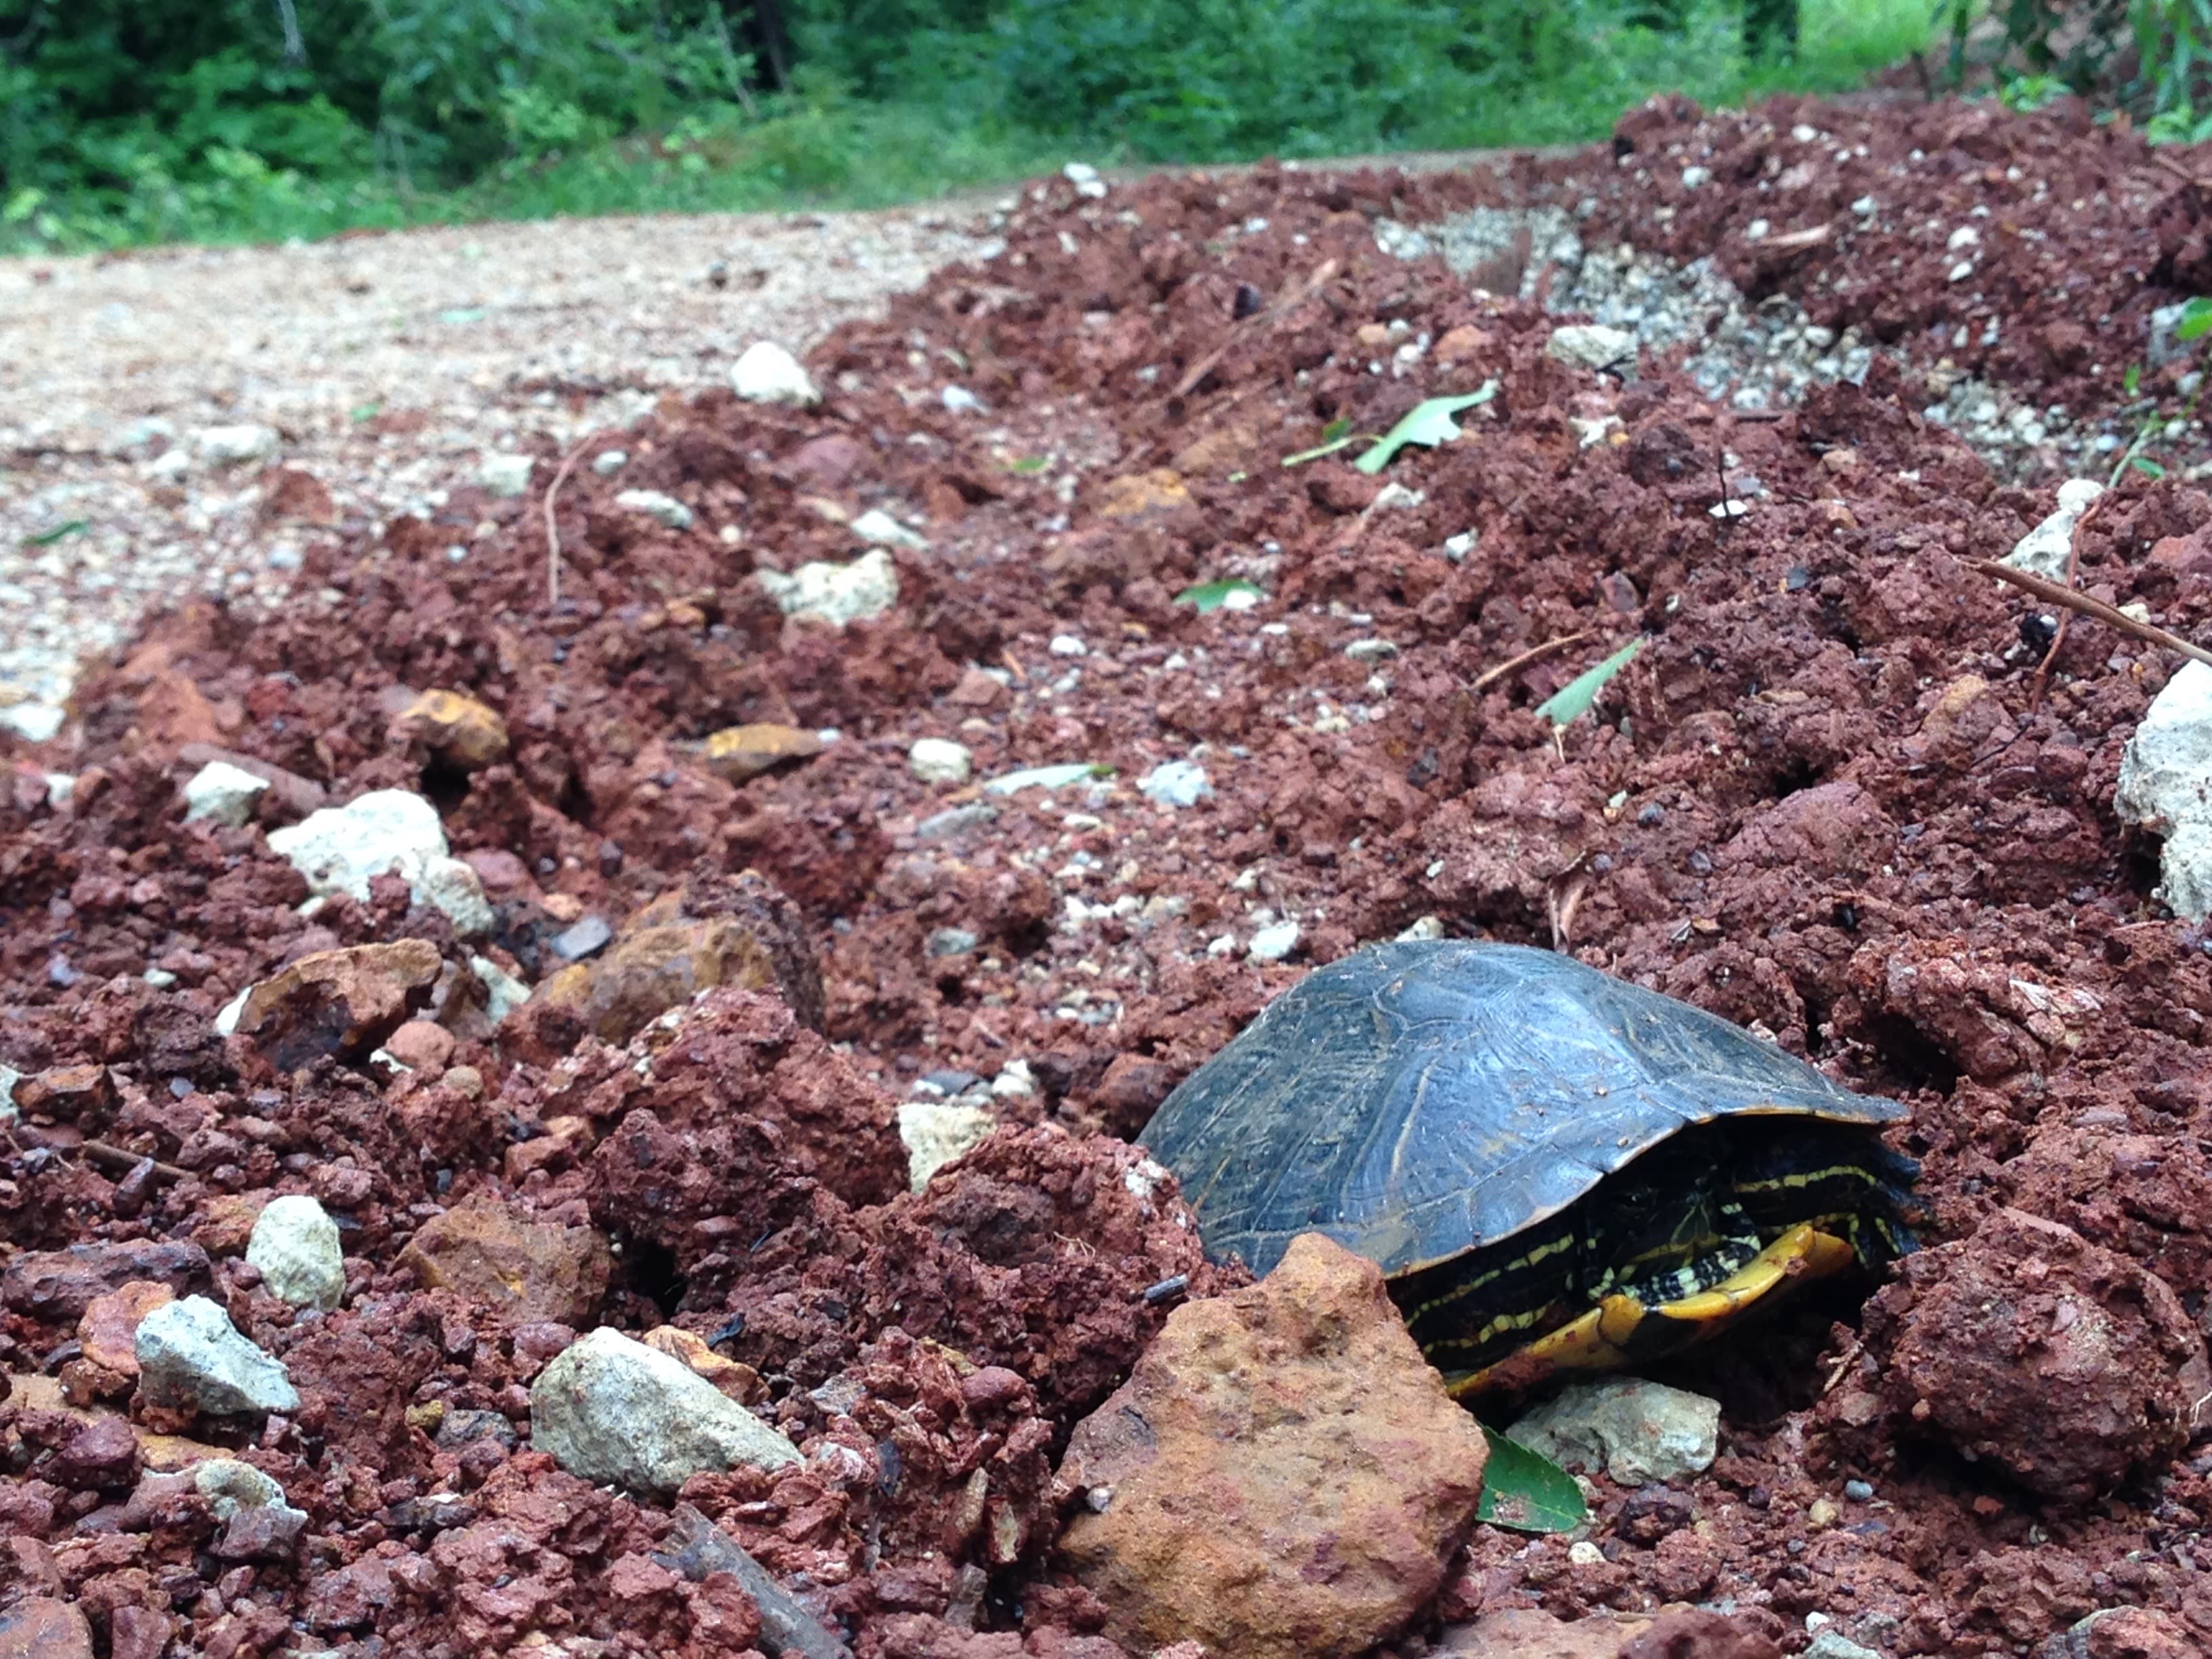 A medium size box turtle peeking out of his shell in the middle of a muddy driveway.